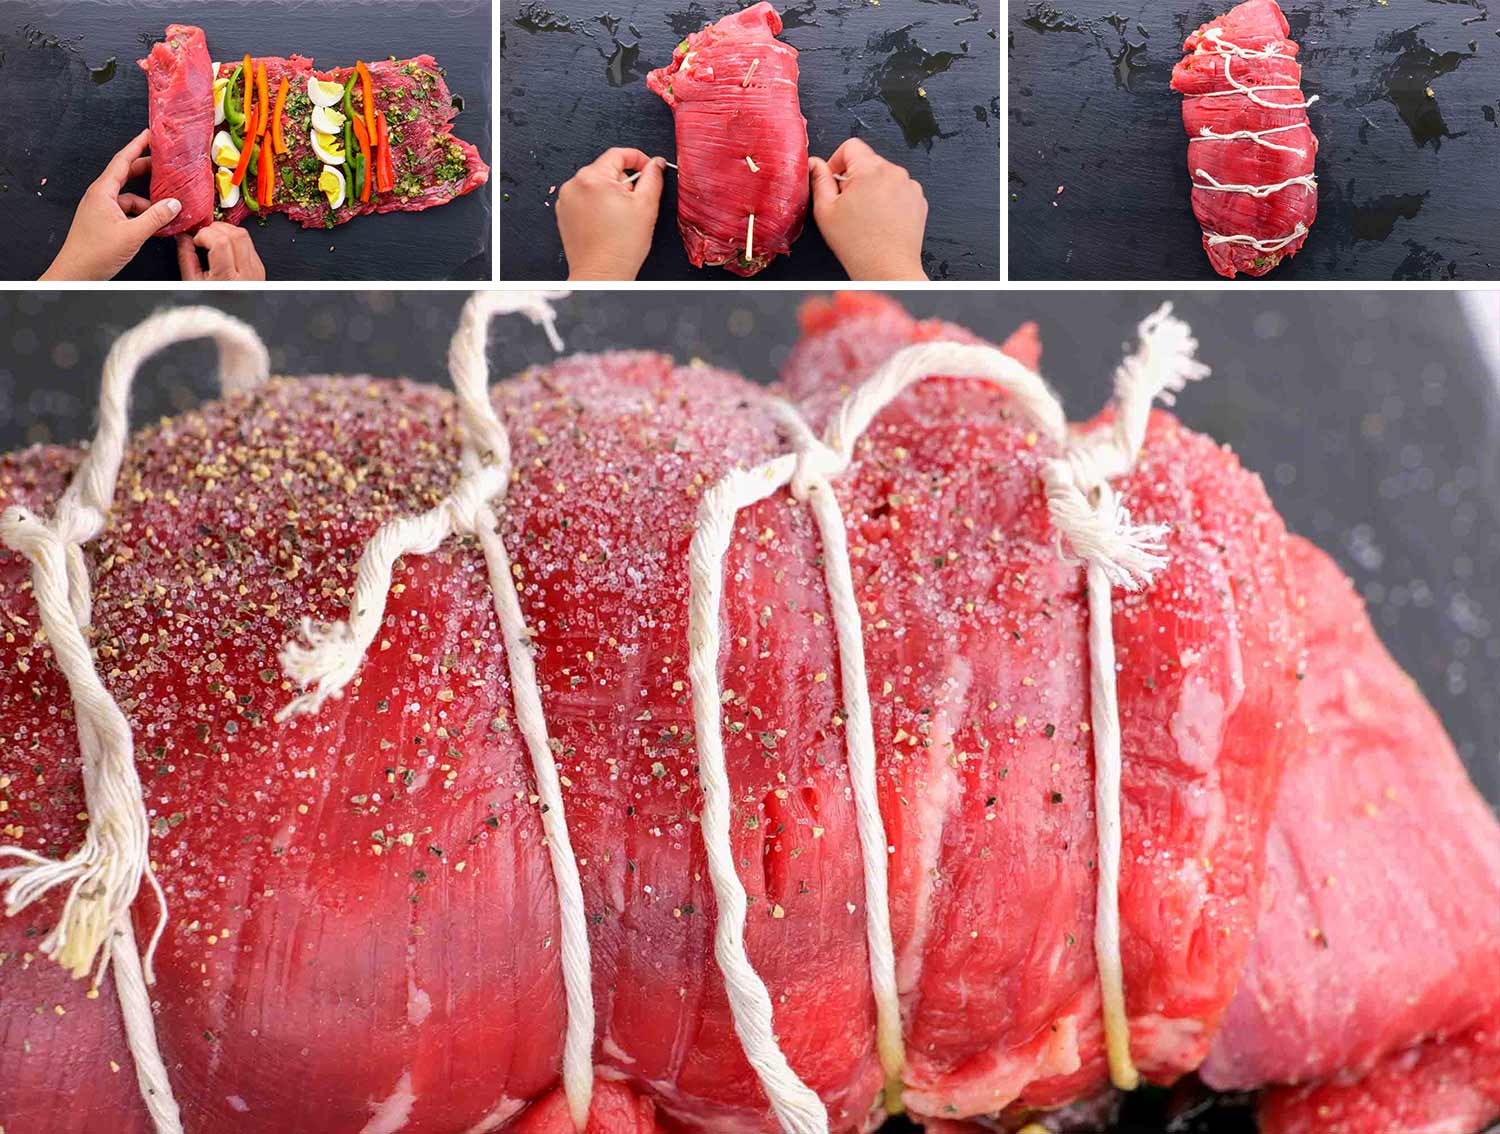 process shots showing how to make matambre, Argentinian flank steak.